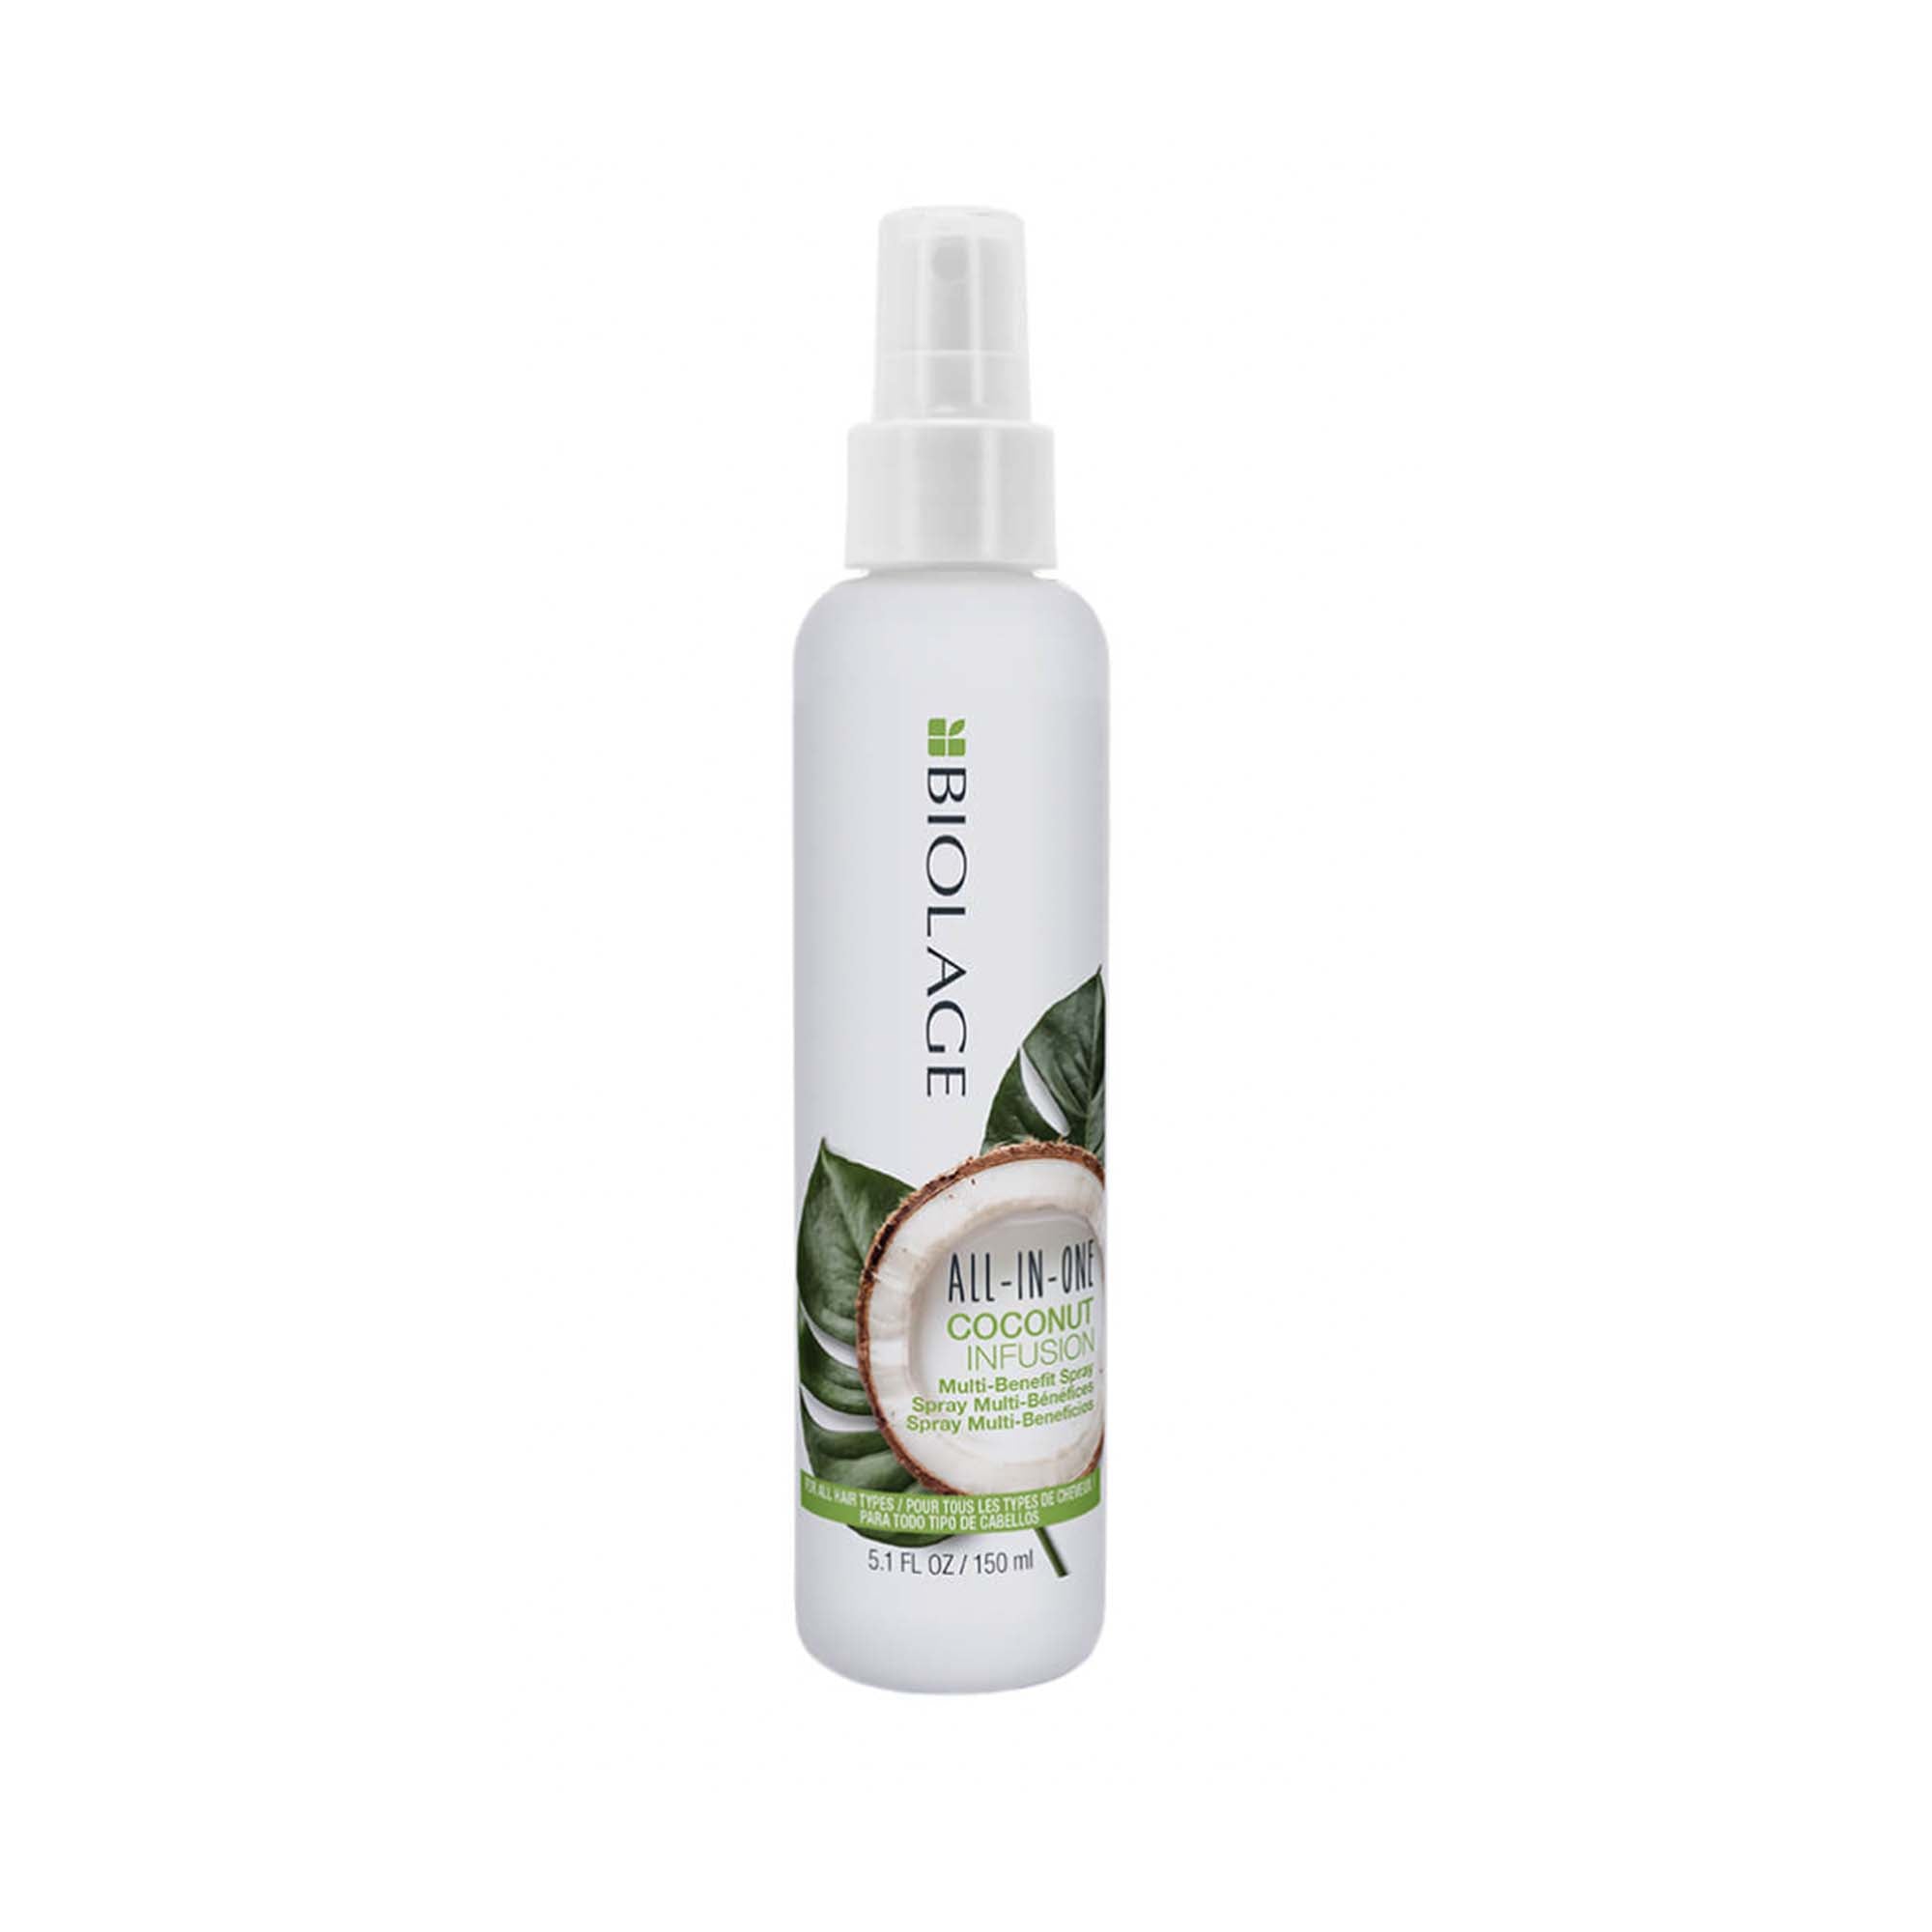 Biolage All-In-One Coconut Infusion Spray 5.1oz